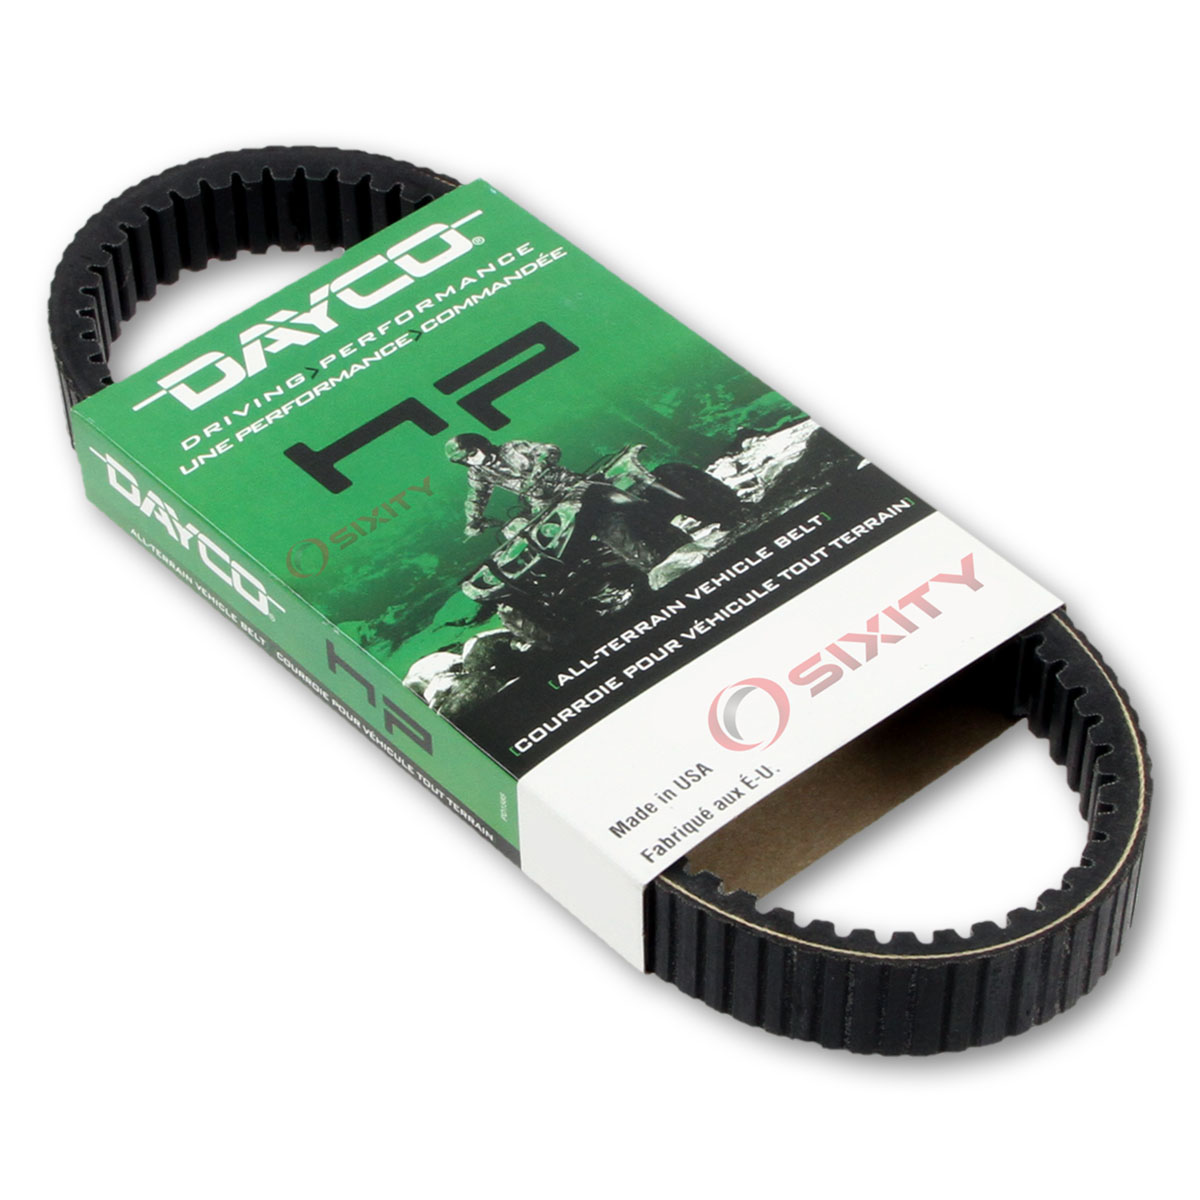 Dayco HP Drive Belt for 2003-2004 Arctic Cat 500 4x4 Auto MRP